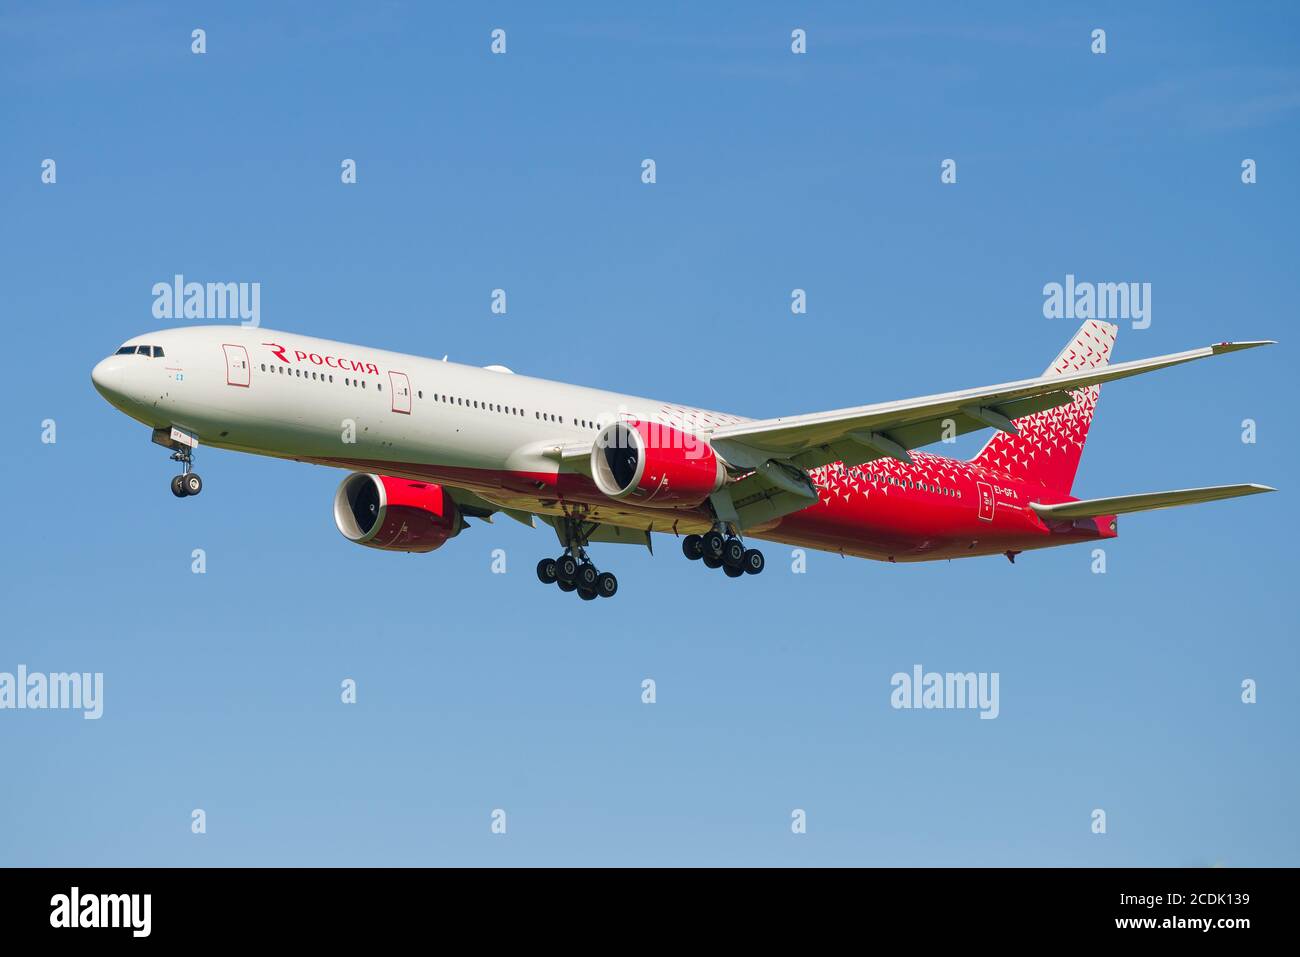 SAINT PETERSBURG, RUSSIA - AUGUST 08, 2020: Airplane Boeing 777-31X (EI-GFA) of Rossiya airlines close-up against blue sky Stock Photo